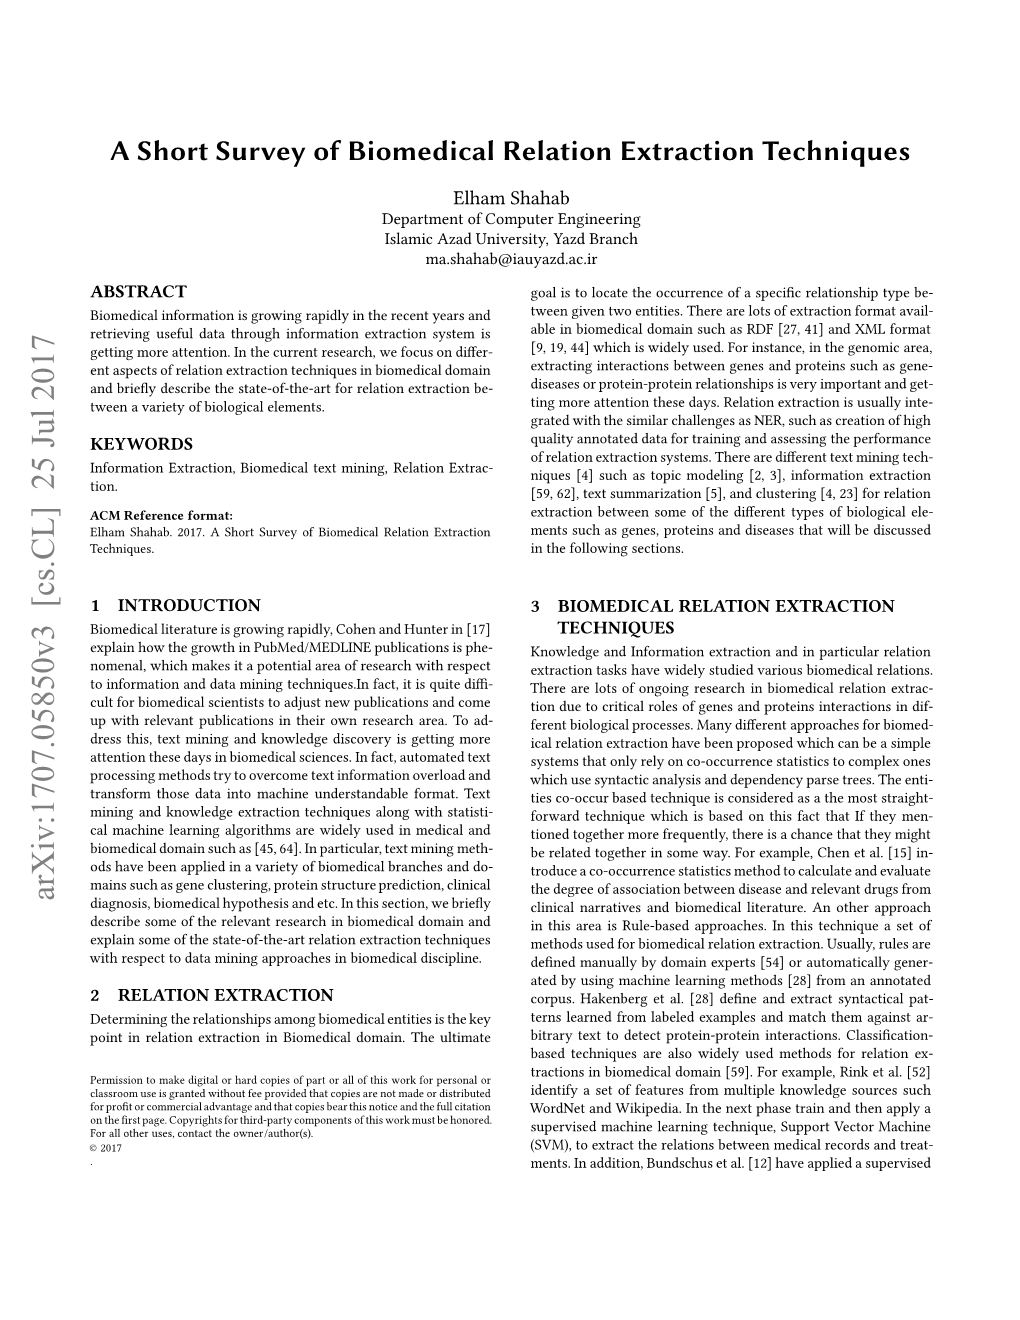 A Short Survey of Biomedical Relation Extraction Techniques